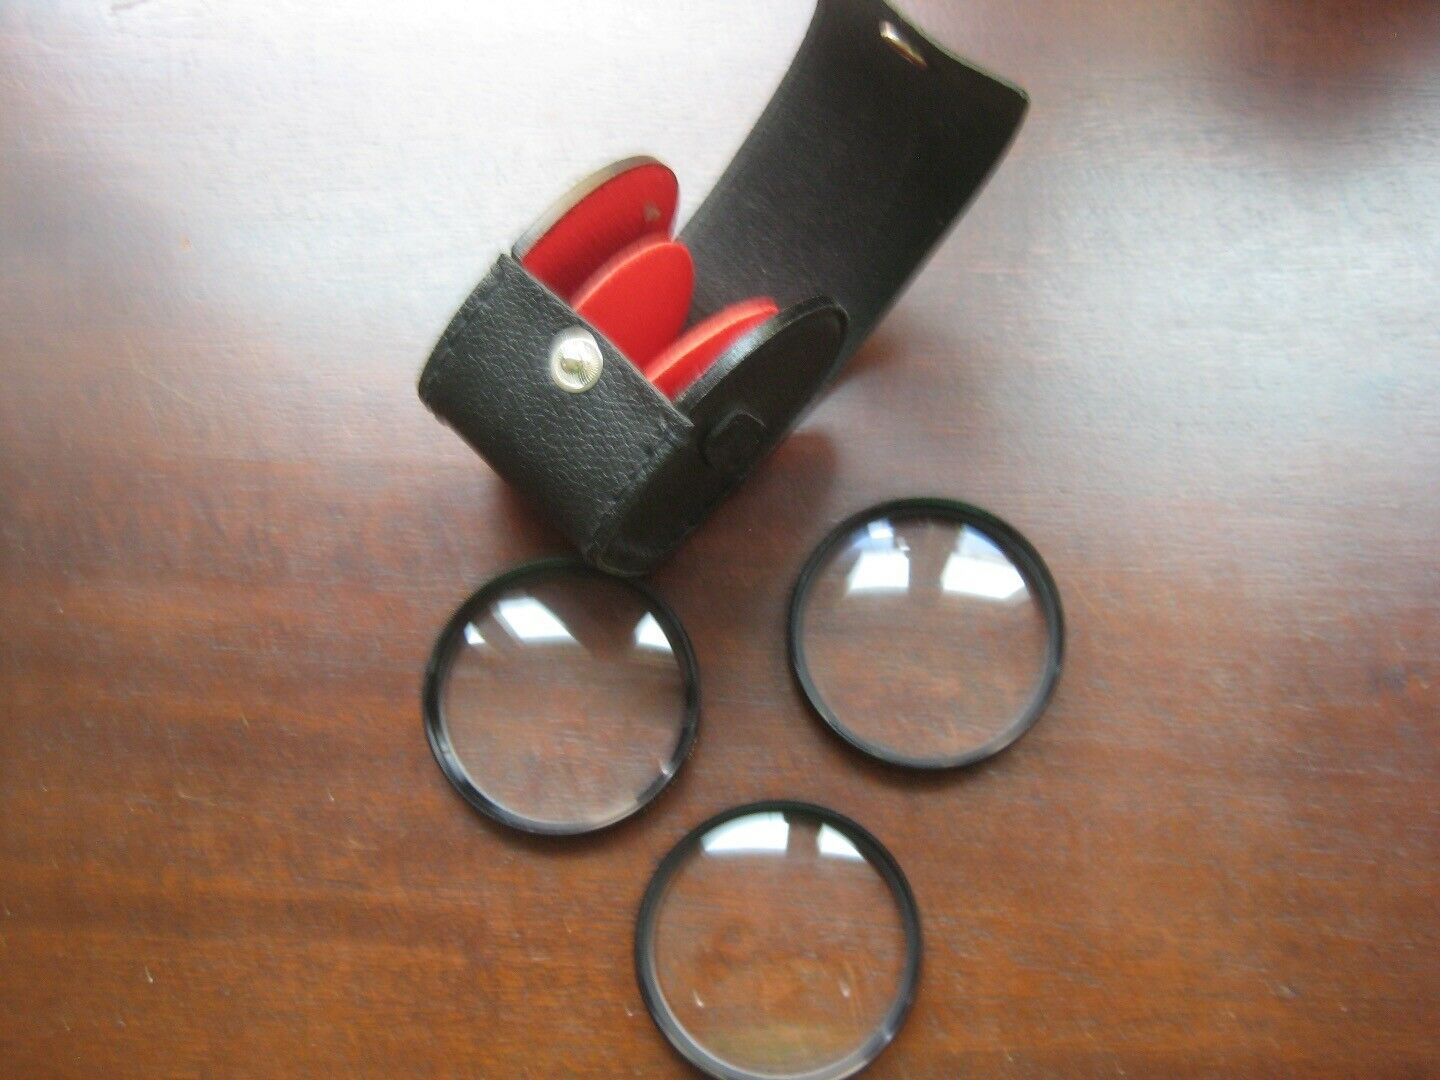 3 Tiffen HCE 52mm 1, 2, & 3, zoom filters made in Japan three slot case included - $19.59